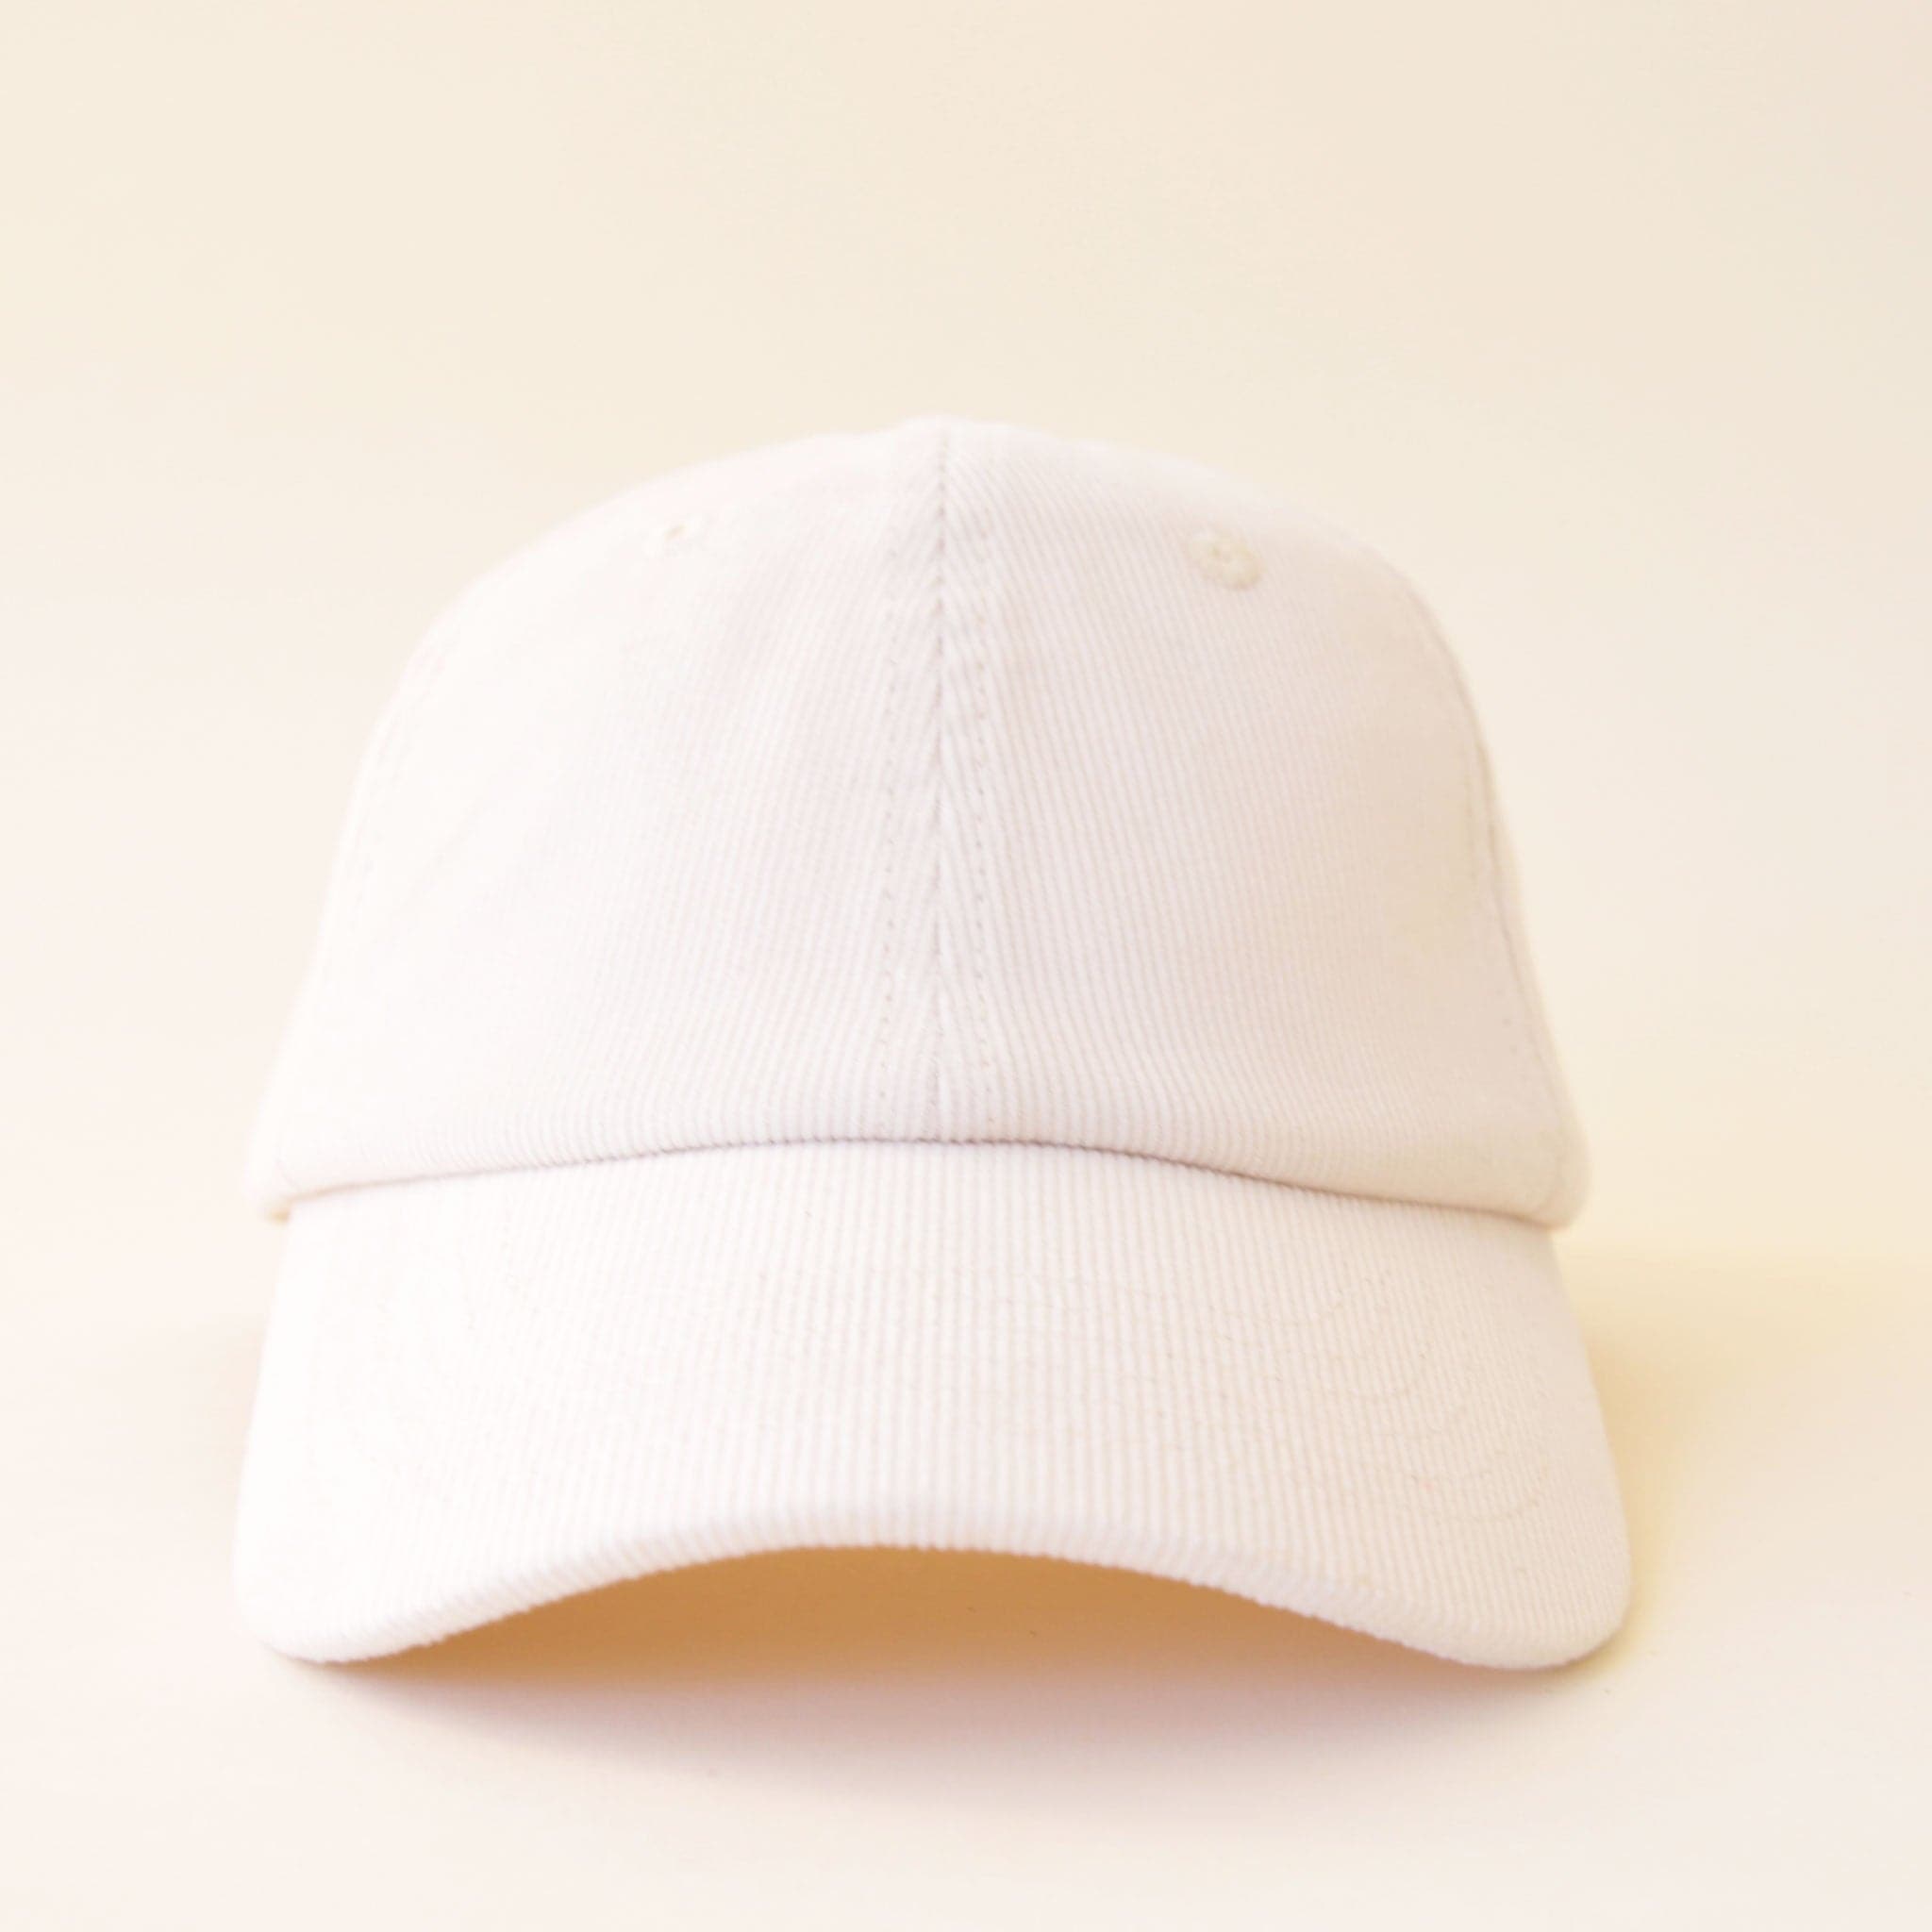 An ivory corduroy baseball hat with a curved bill.